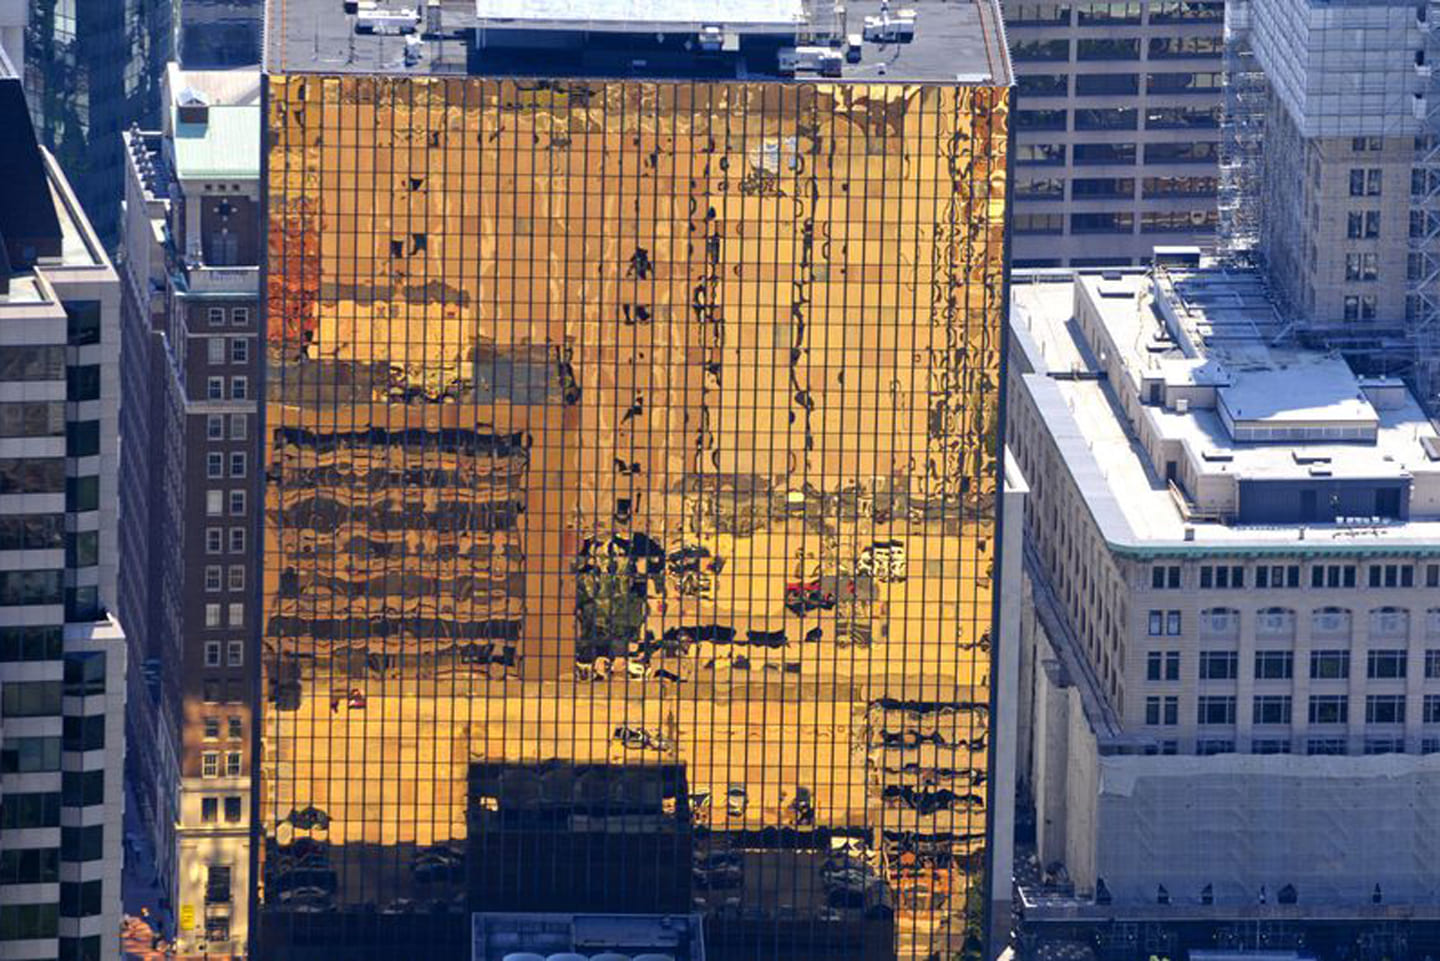 The Gold Building